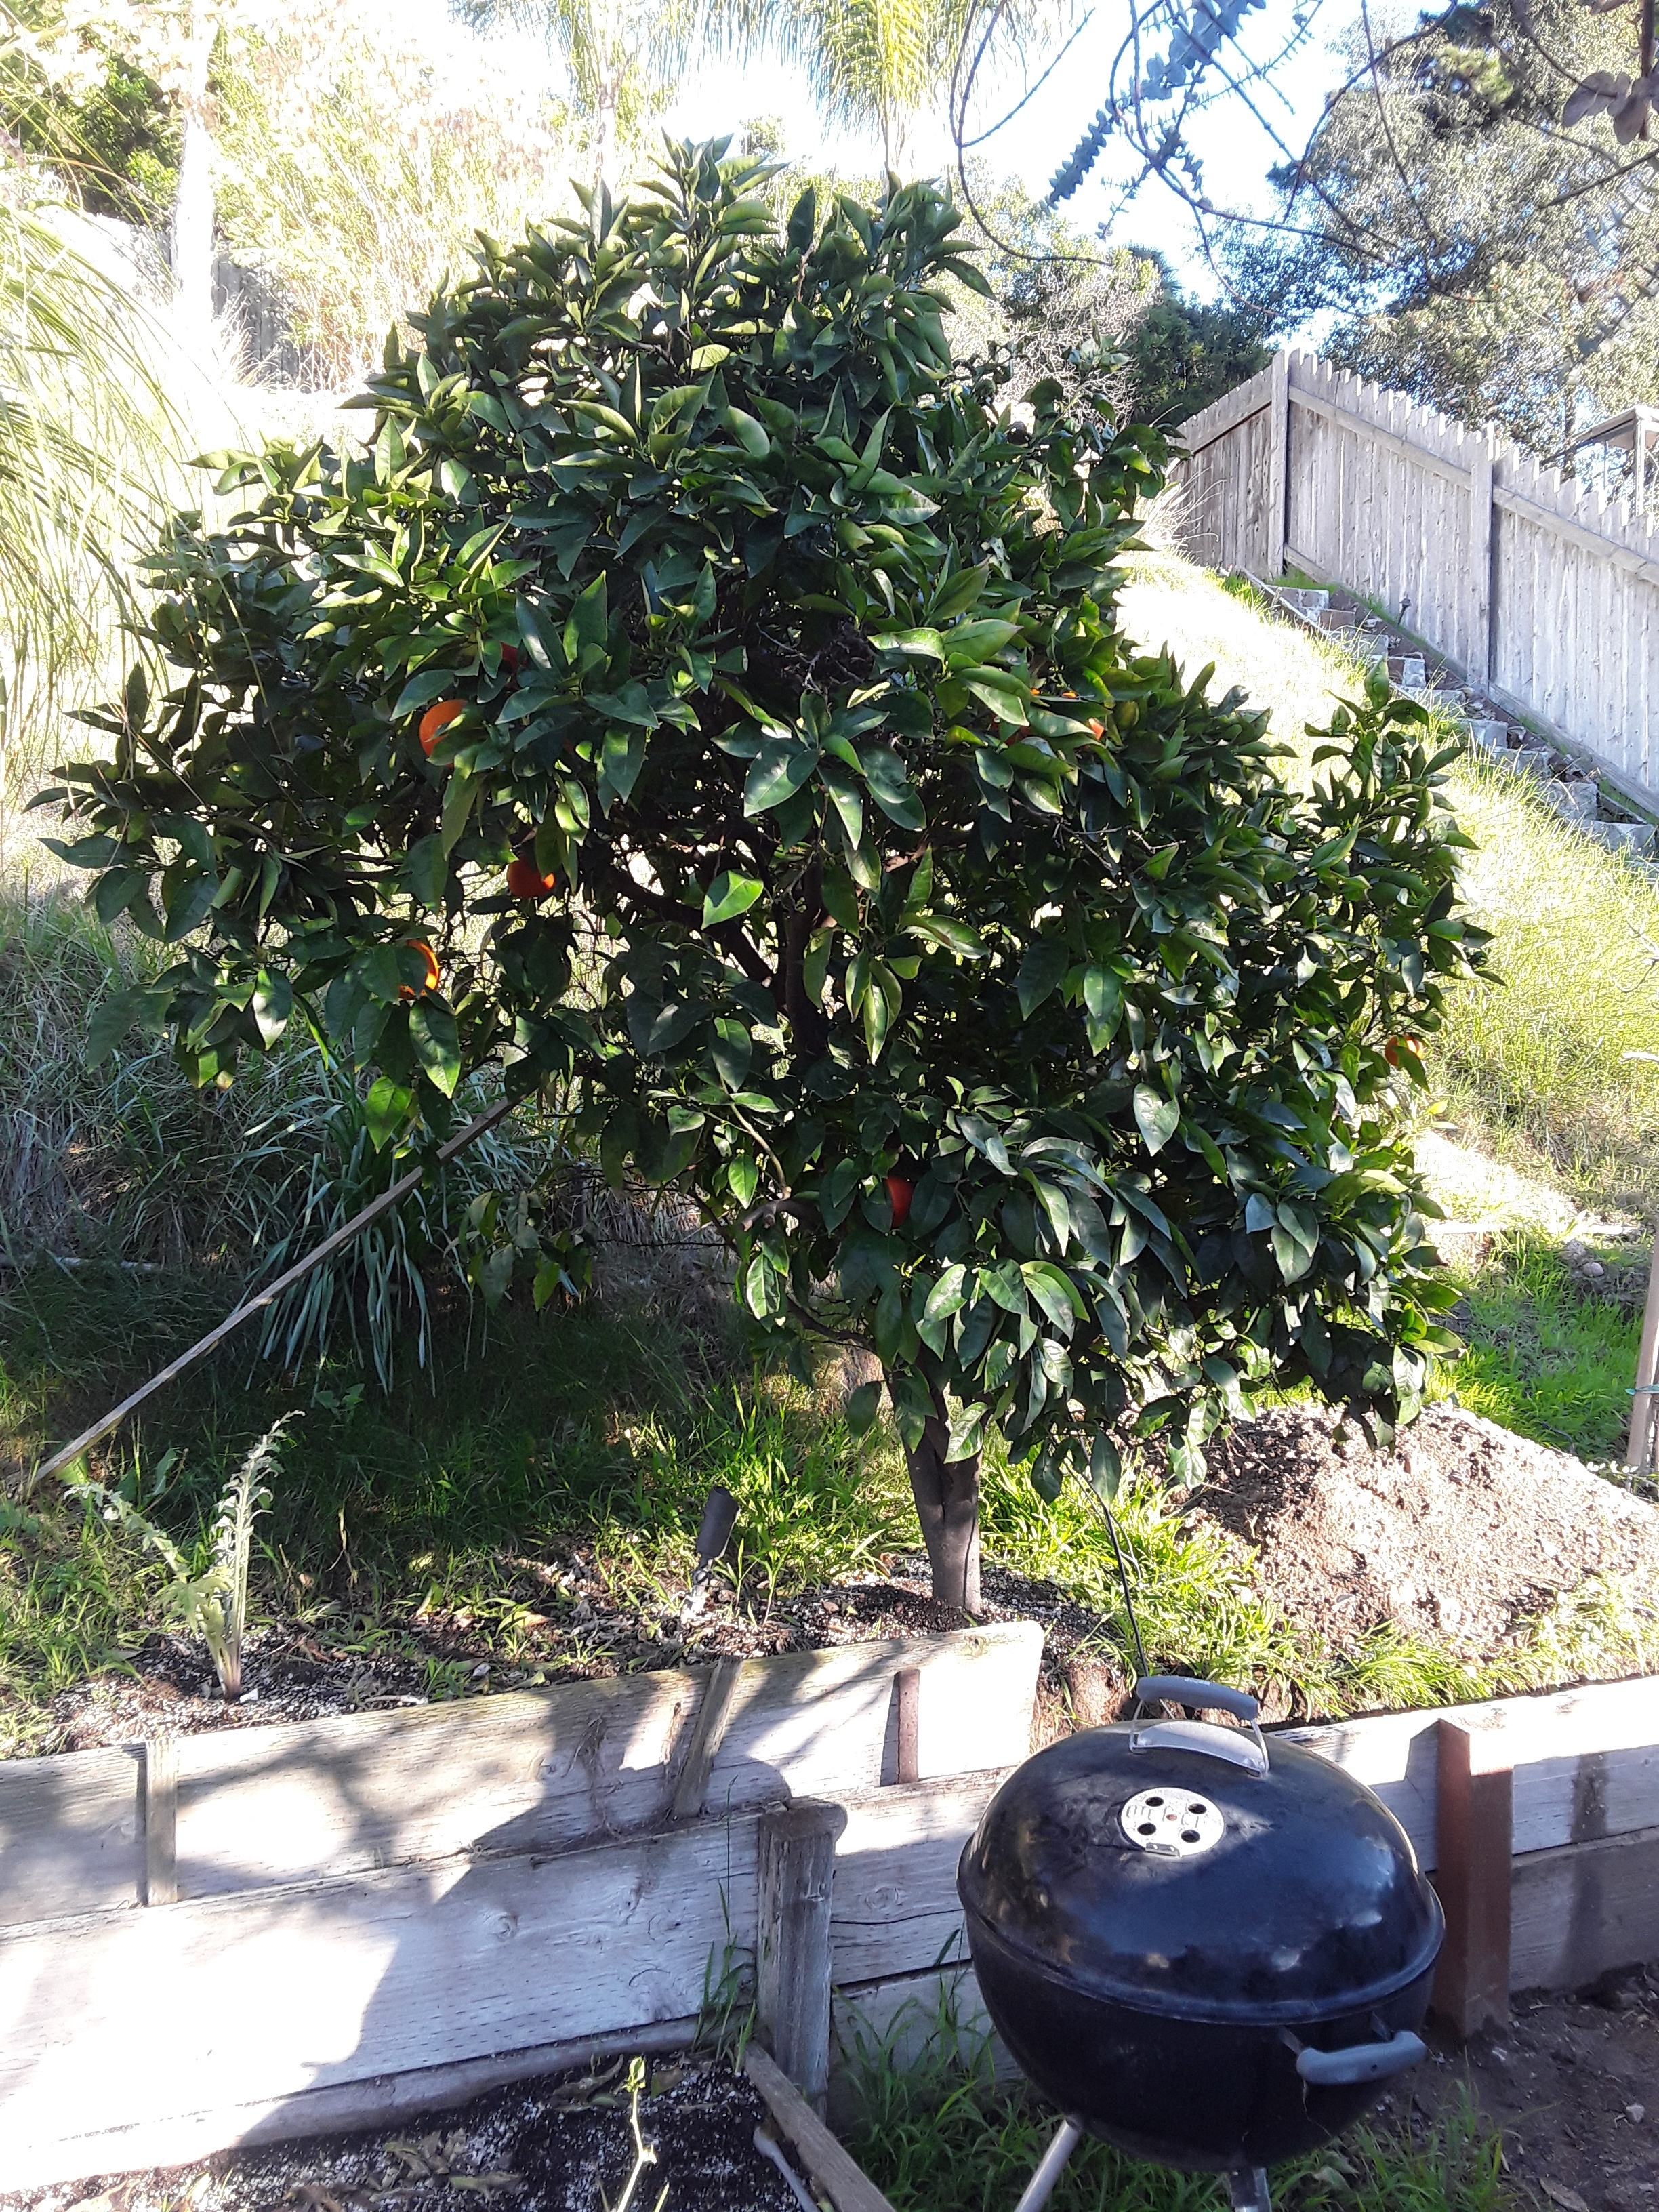 (1/3) “My Blood Orange citrus tree. This and the Peach Tree in the front yard have a ton of flowers and buds!” -Matt Jones [taken on 2/22/19 in CA]